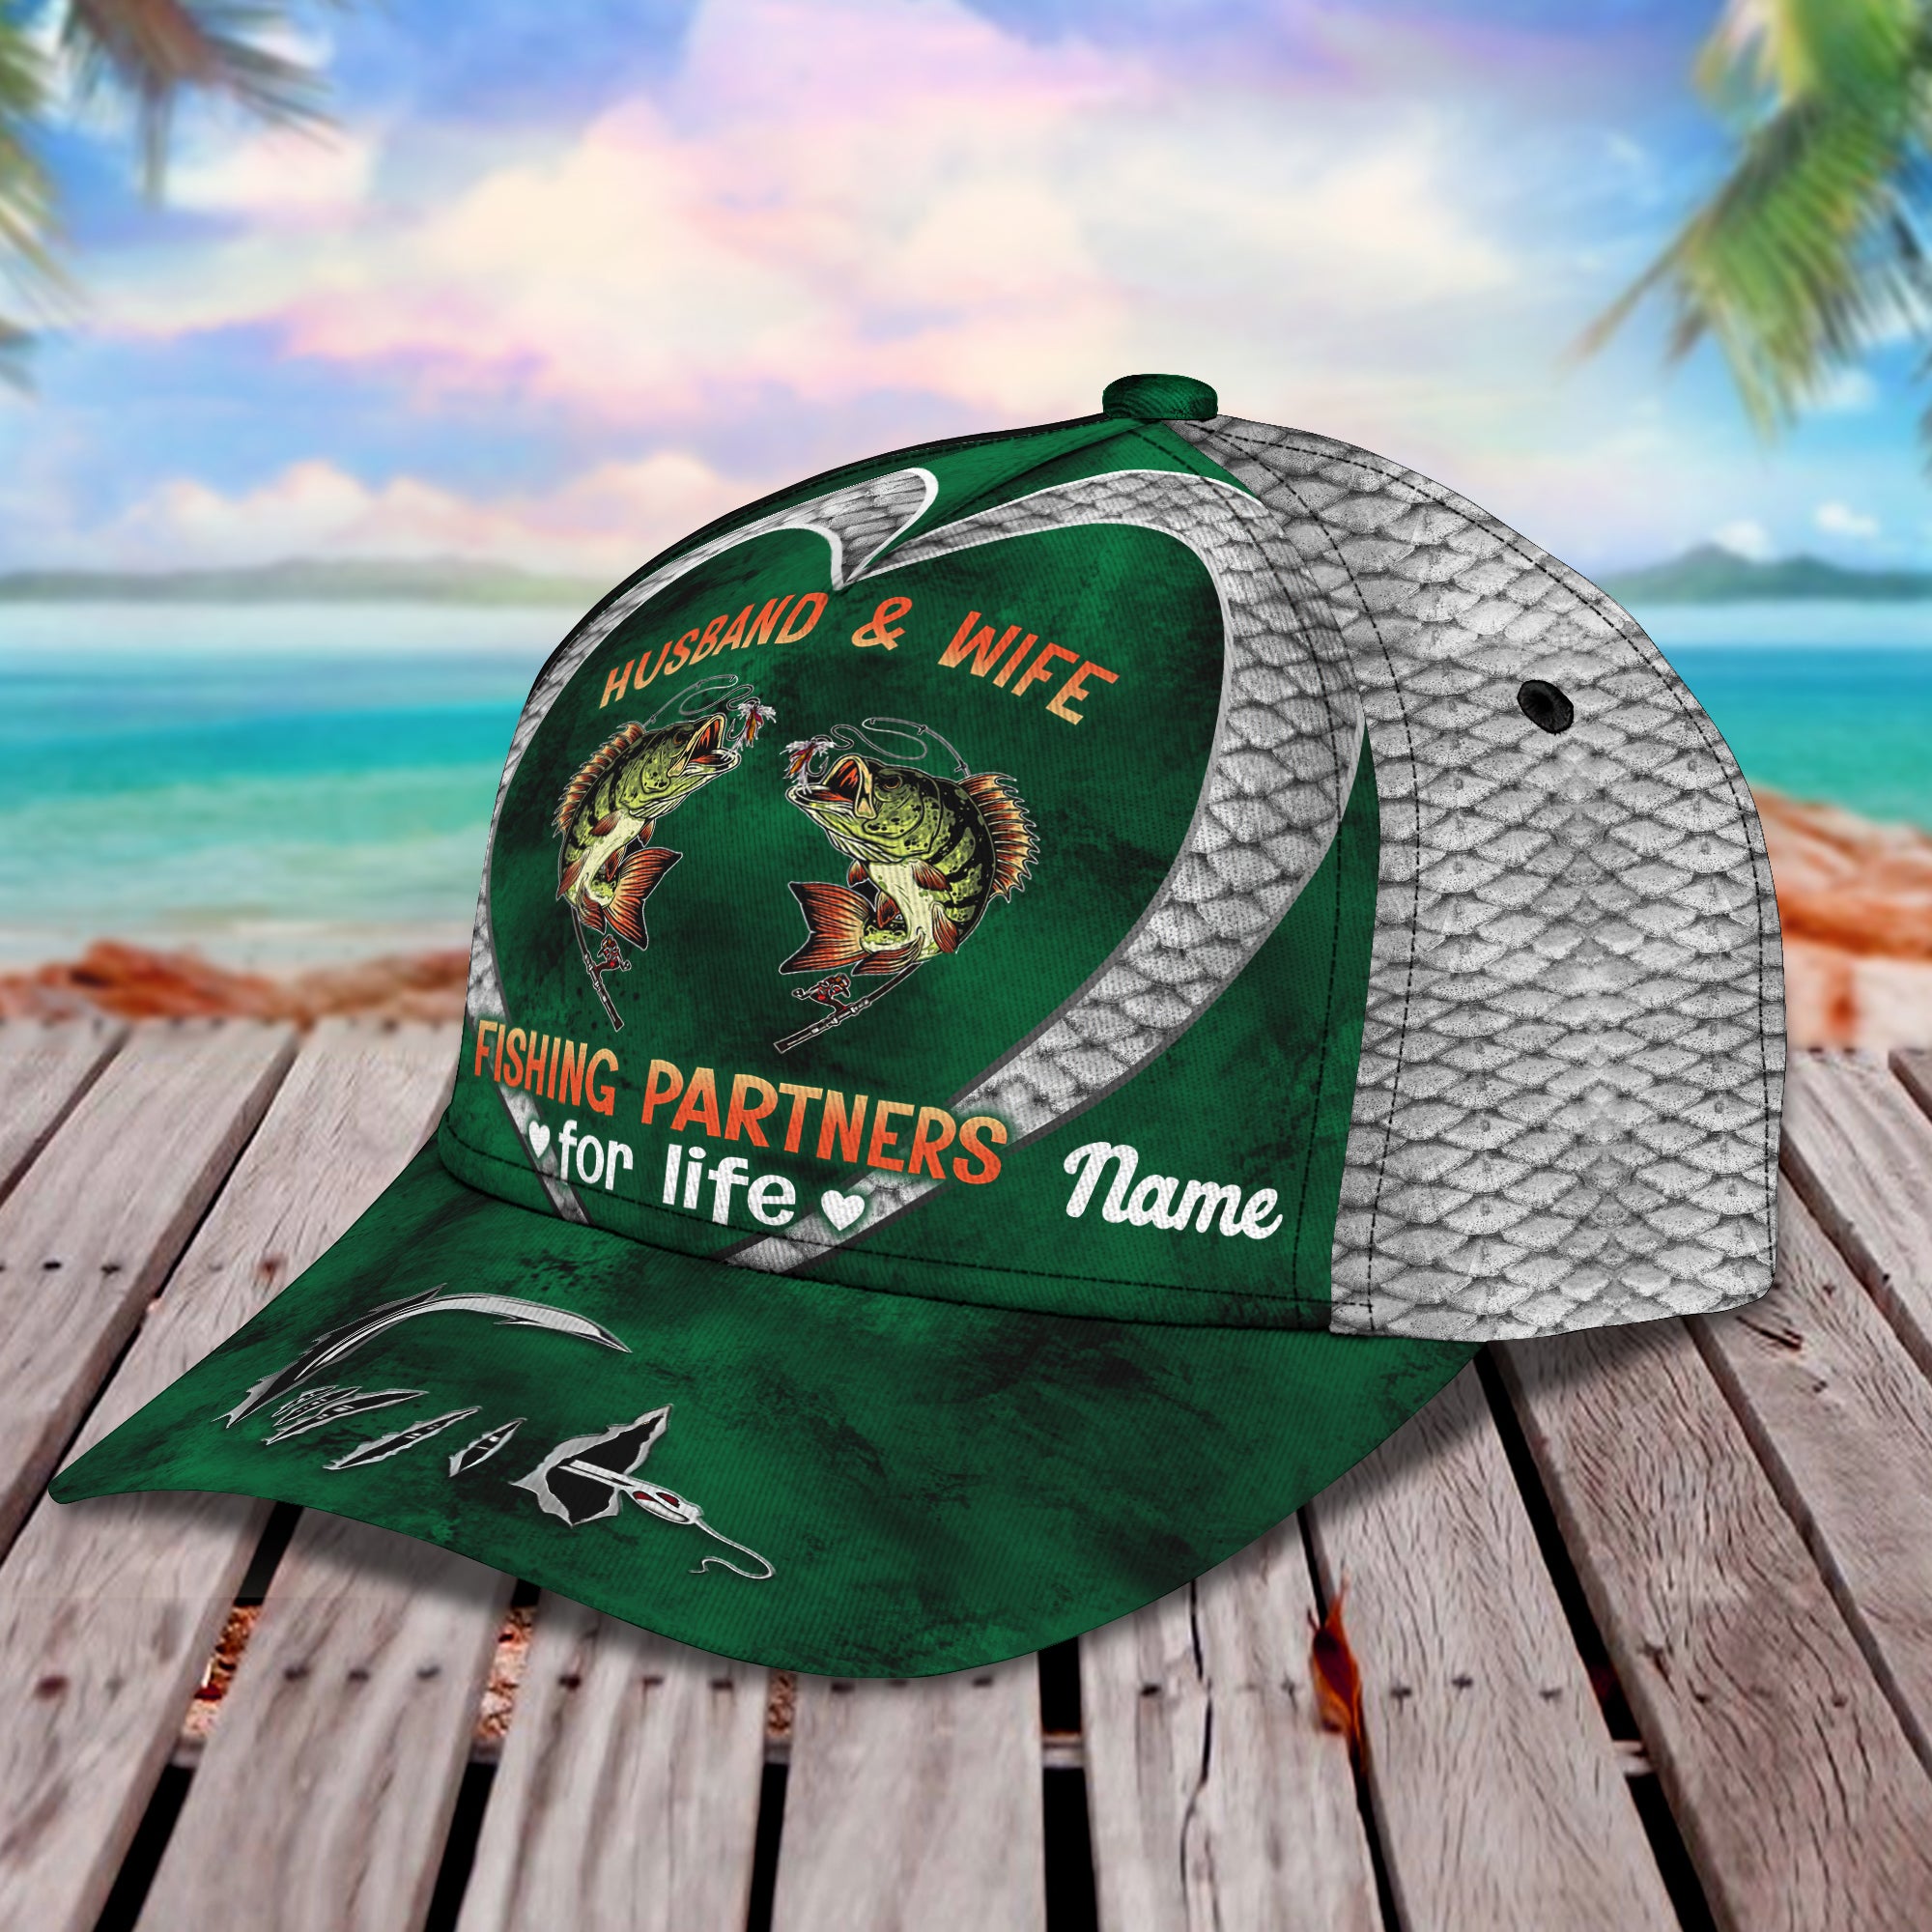 Husband & Wife Fishing Partners For Life - Personalized Name Cap 34 - Tad